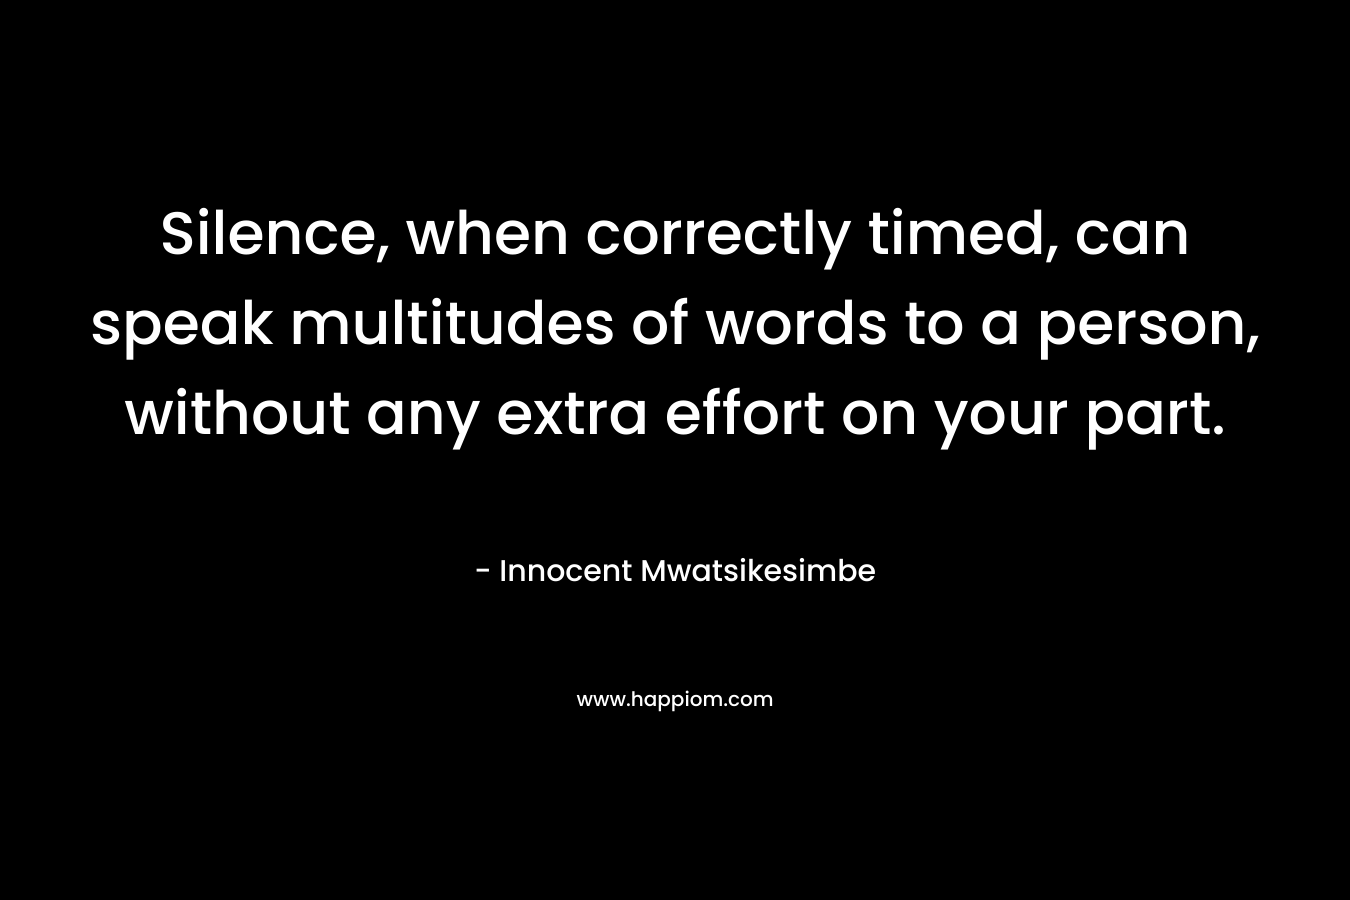 Silence, when correctly timed, can speak multitudes of words to a person, without any extra effort on your part. – Innocent Mwatsikesimbe